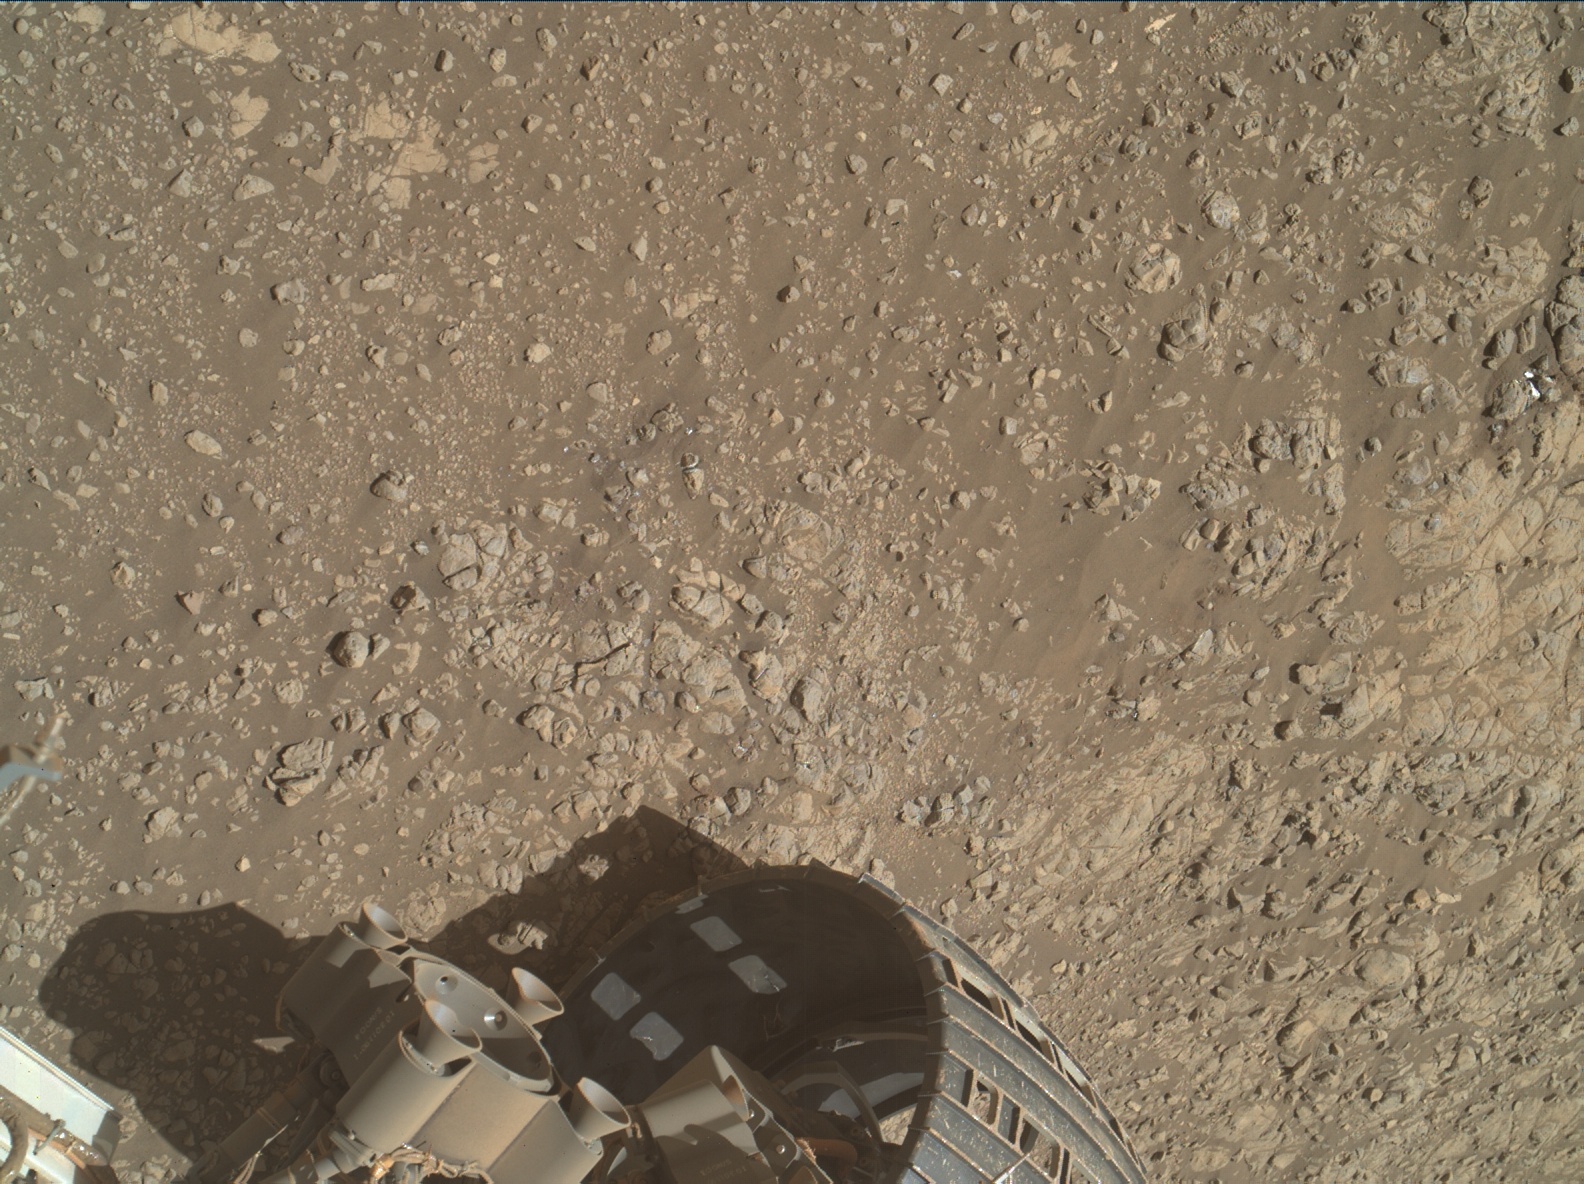 Nasa's Mars rover Curiosity acquired this image using its Mars Hand Lens Imager (MAHLI) on Sol 1943